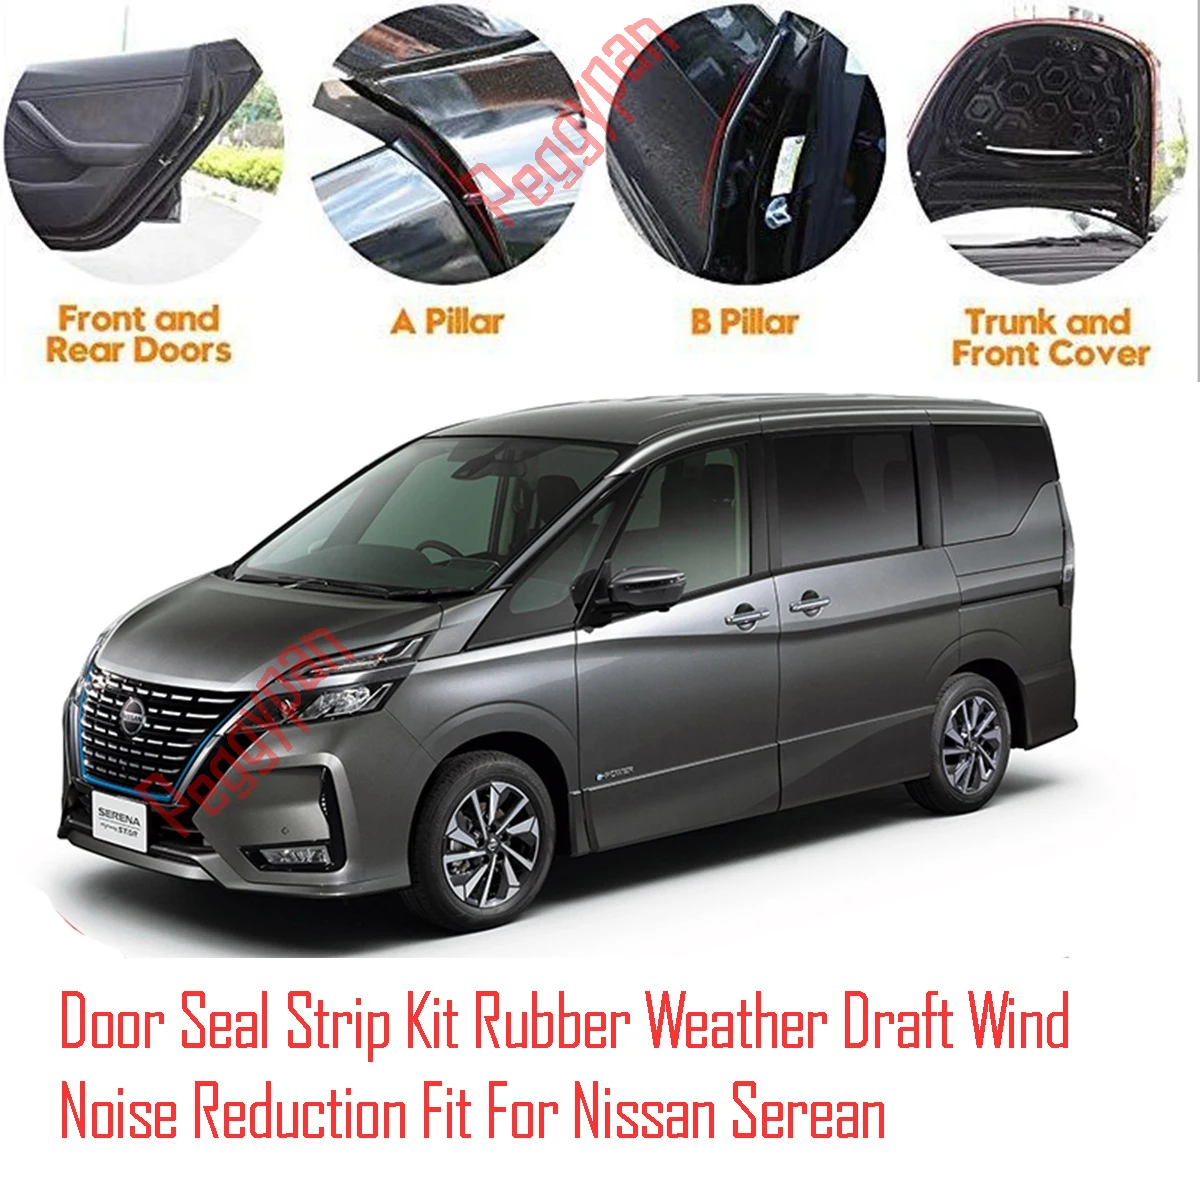 Door Seal Strip Kit Self Adhesive Window Engine Cover Soundproof Rubber Weather Draft Wind Noise Reduction Fit For Nissan Serean